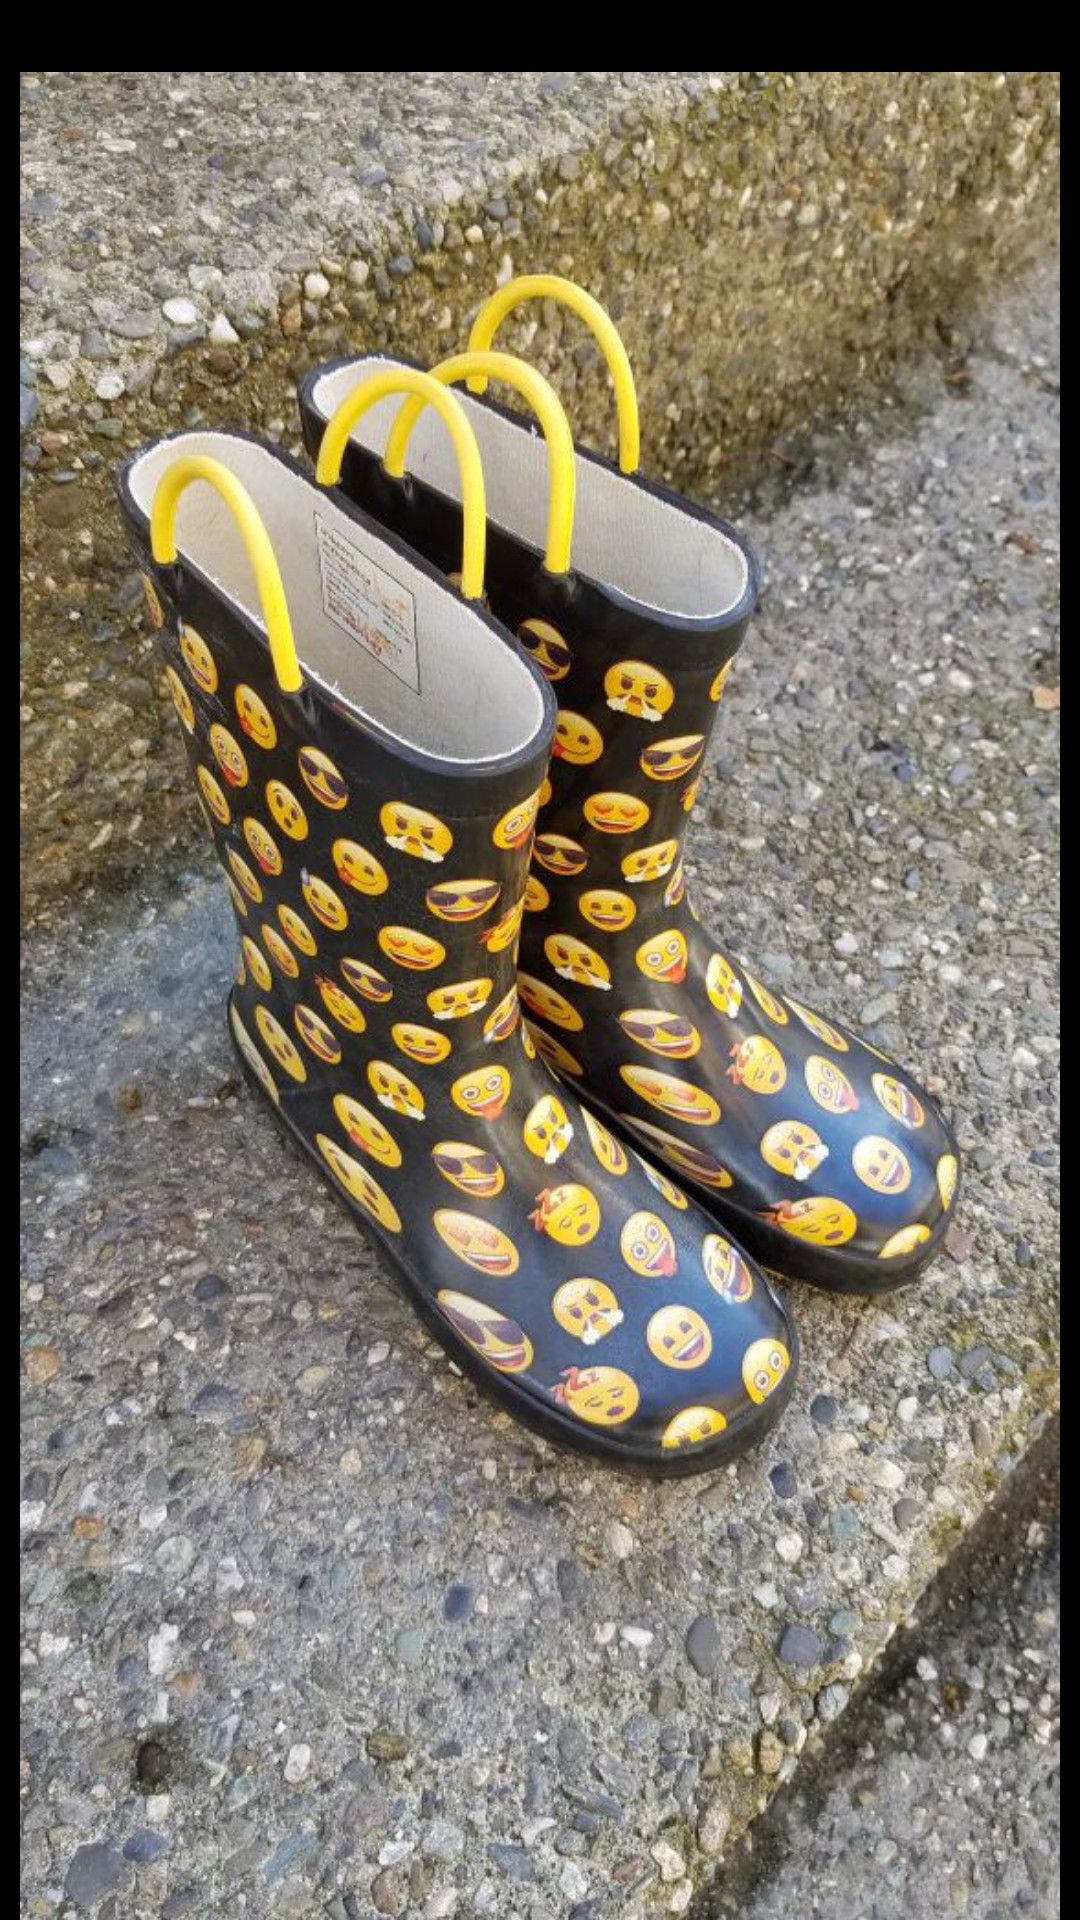 Kid's rain boots size 13 or 1 youth for boy or girl, great condition